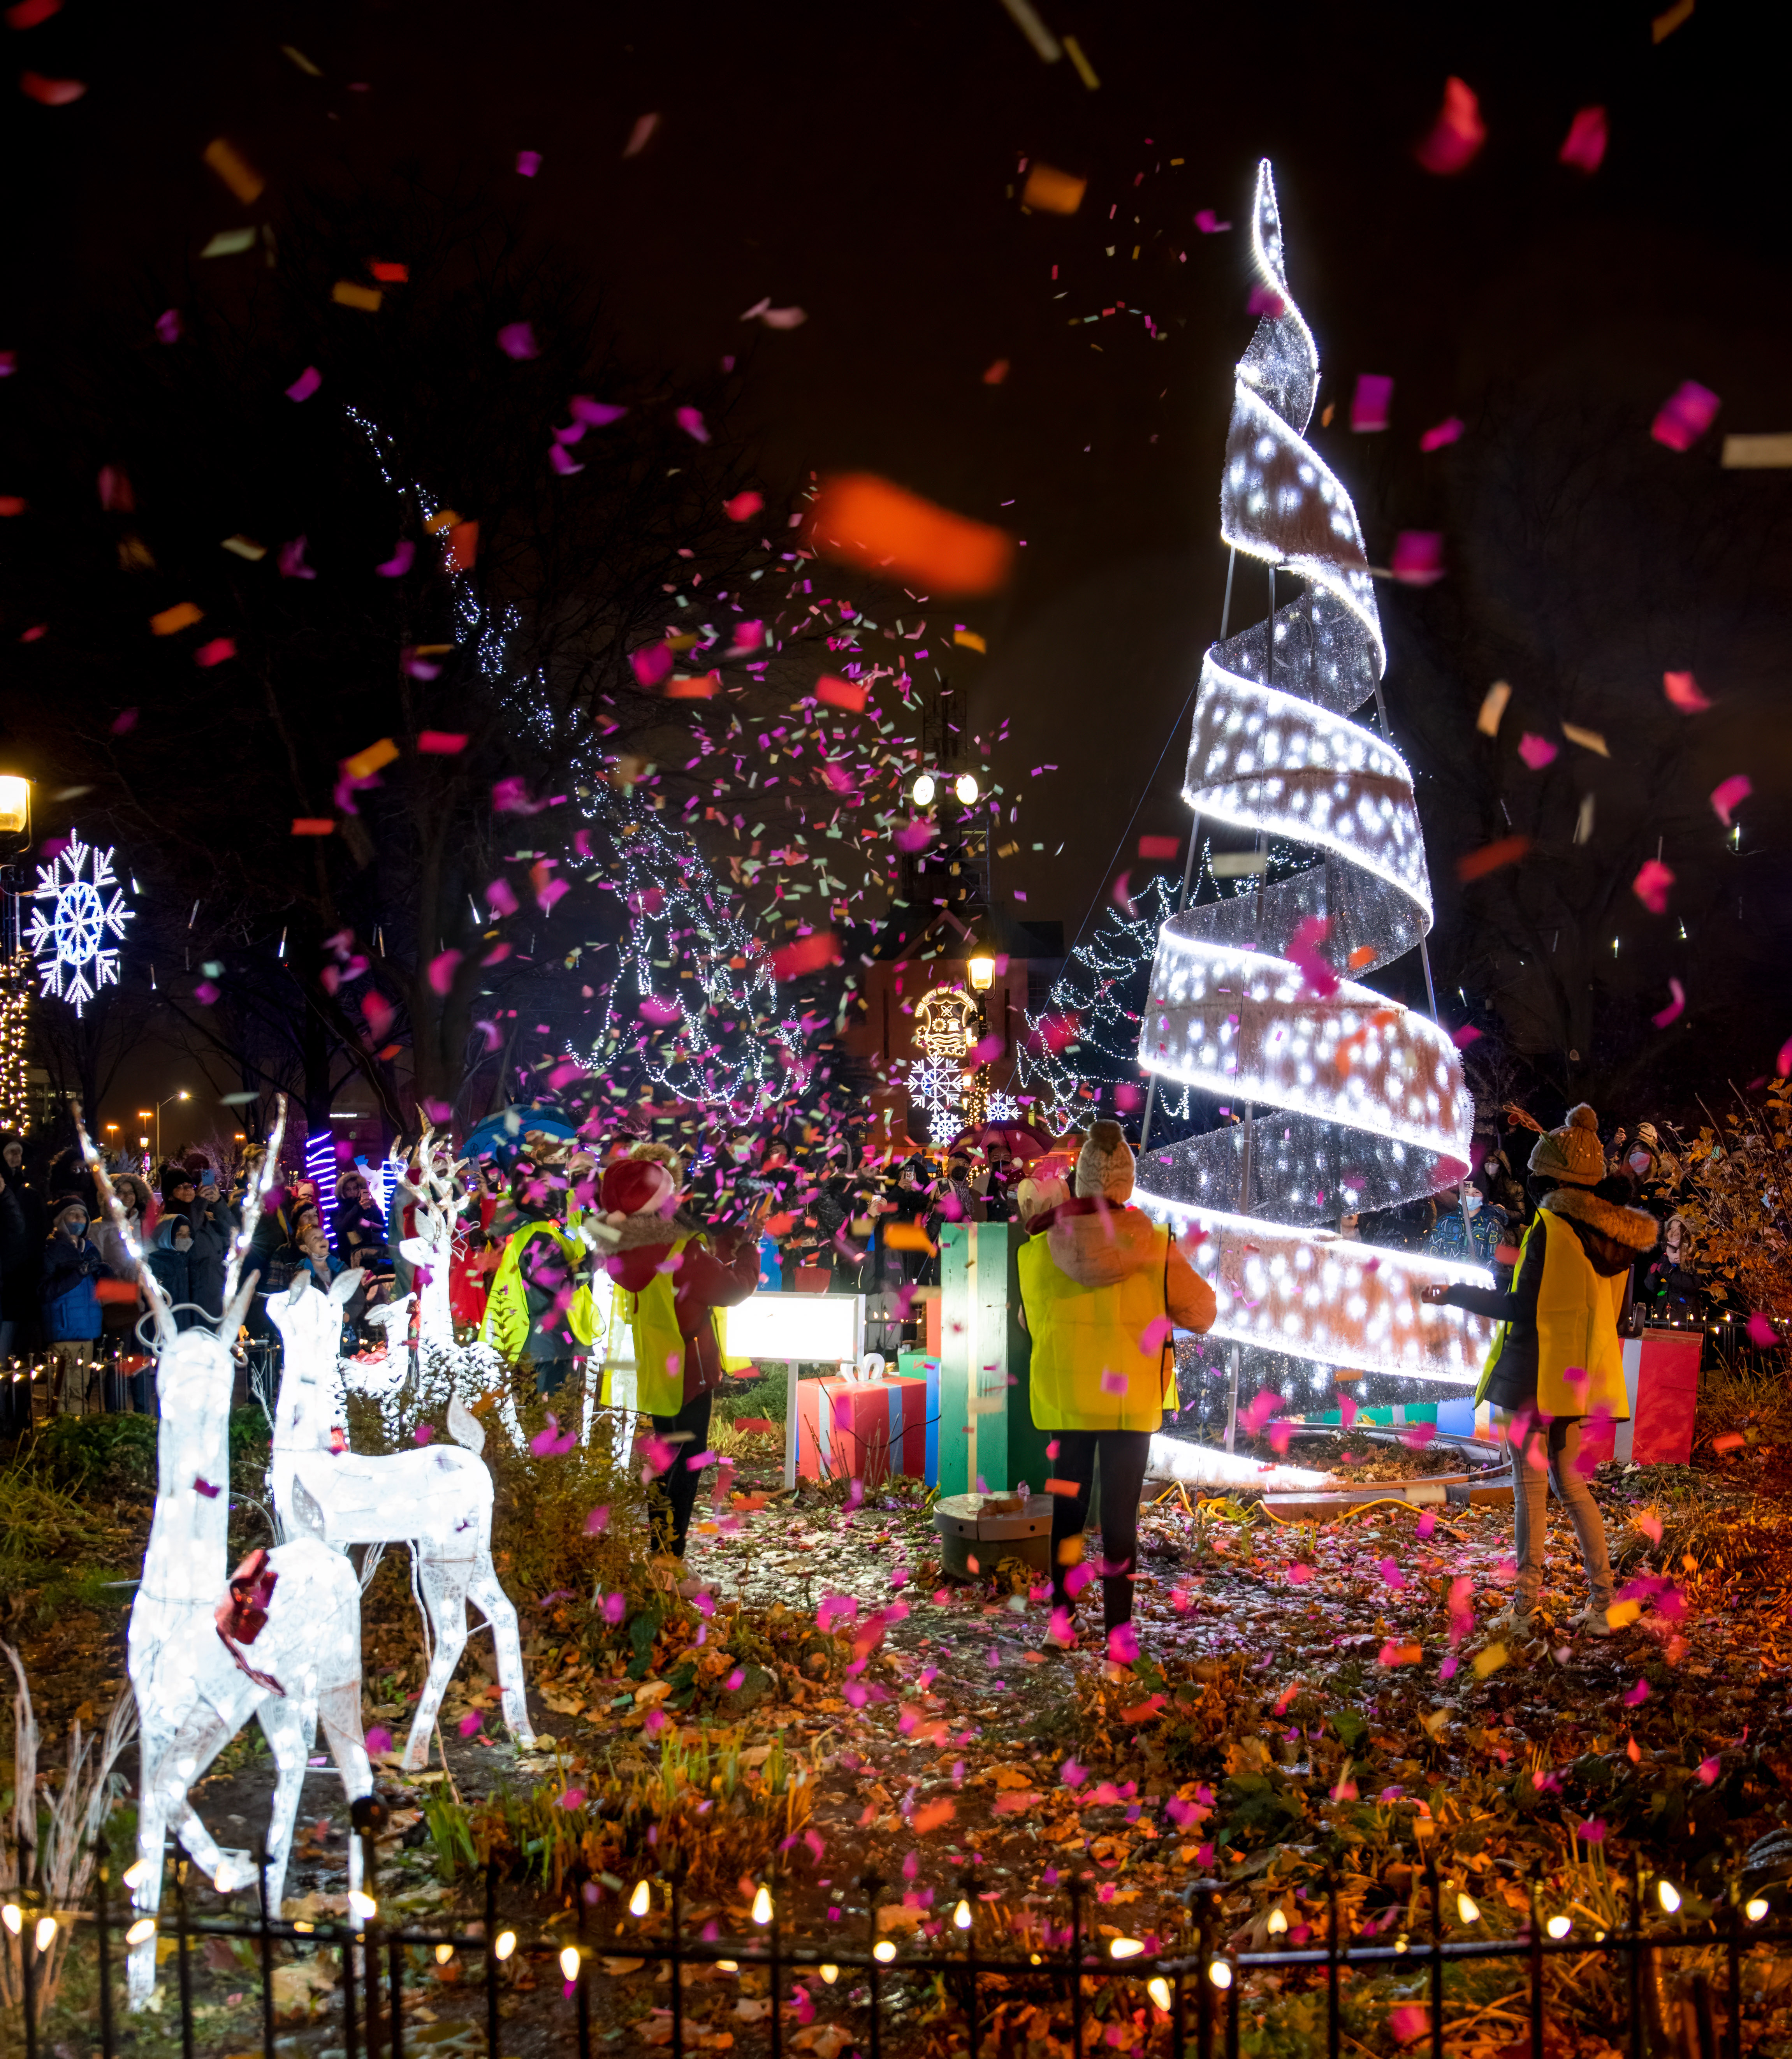 Image of holiday lights, confetti, children and decorations including a tree and deer statues.